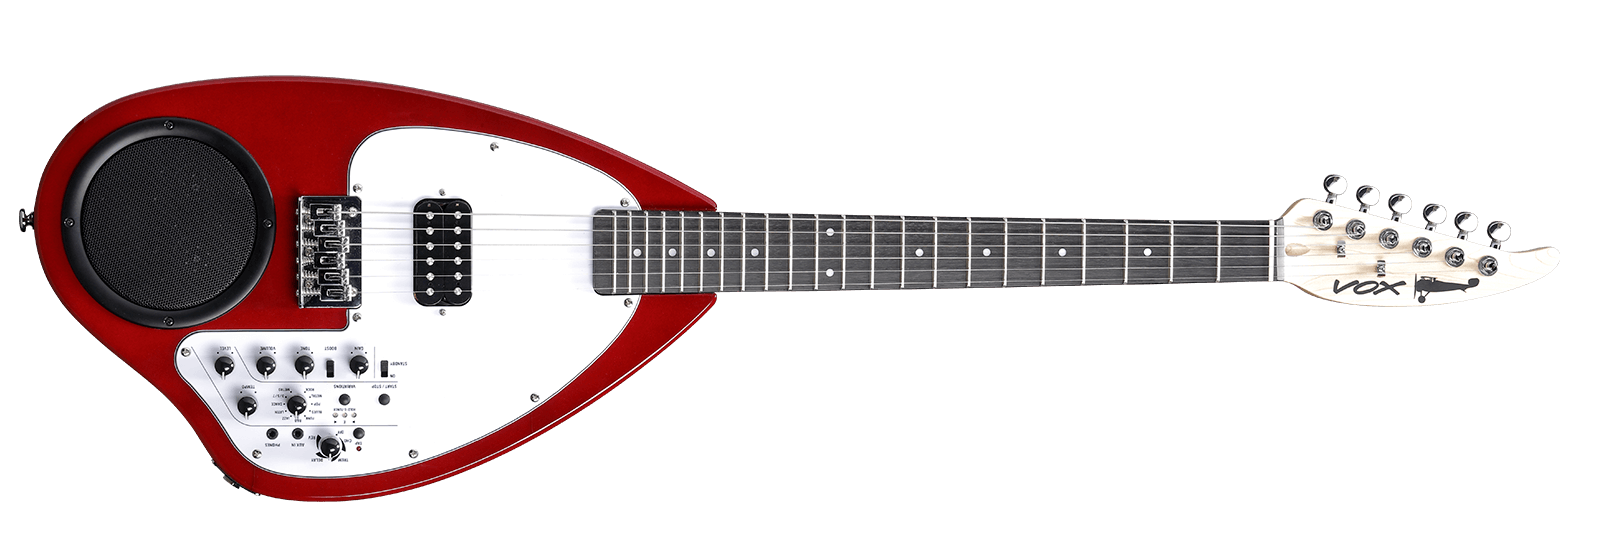 Vox APC-1 Travel Guitars With Built-In Amp And Rhythm Red Metallic horizontal